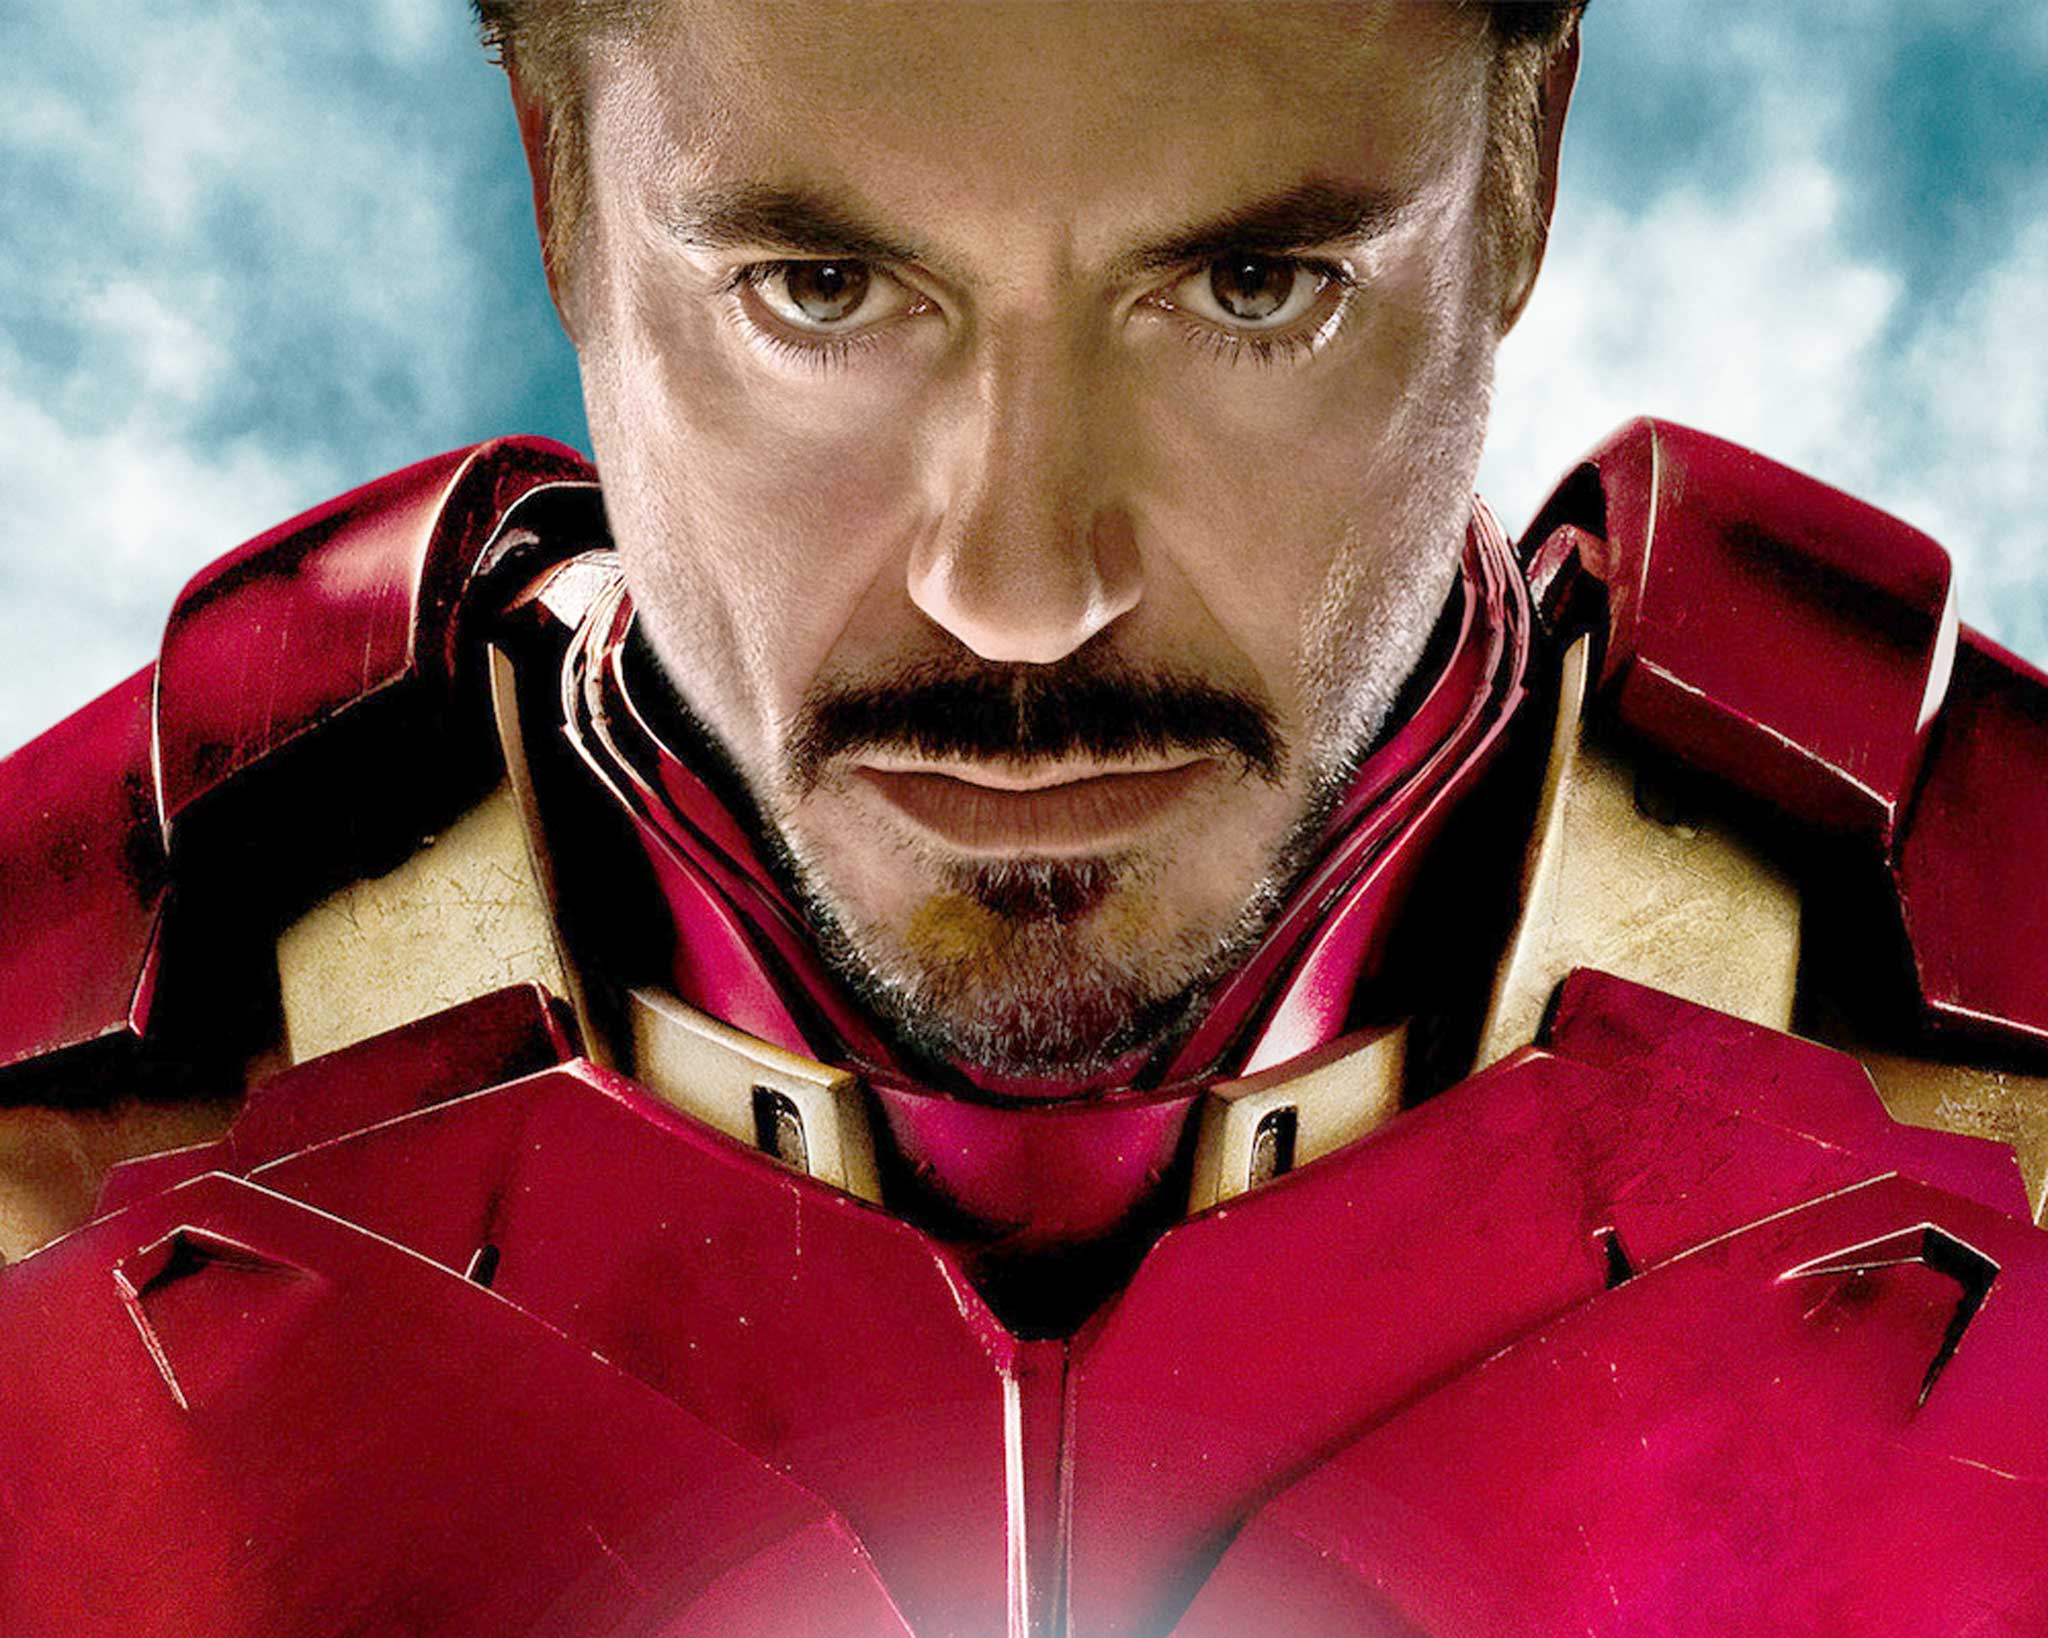 Robert Downey Jr in his starring role in Iron Man 3